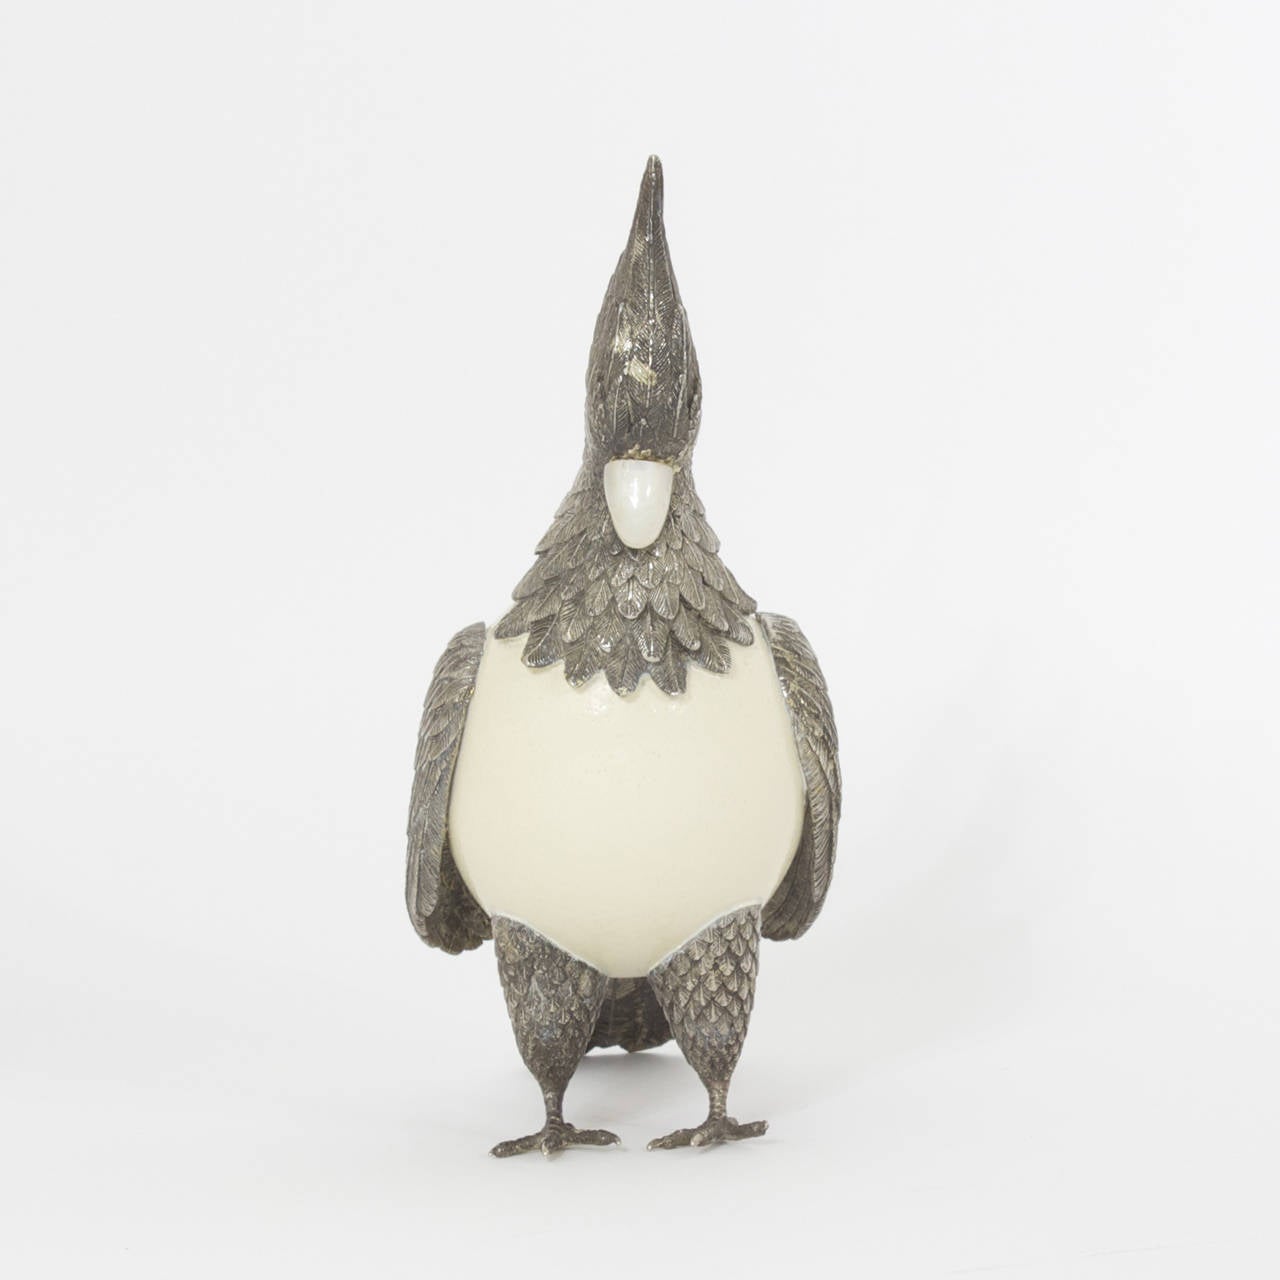 20th Century Silvered Metal Bird with Ostrich Egg Body